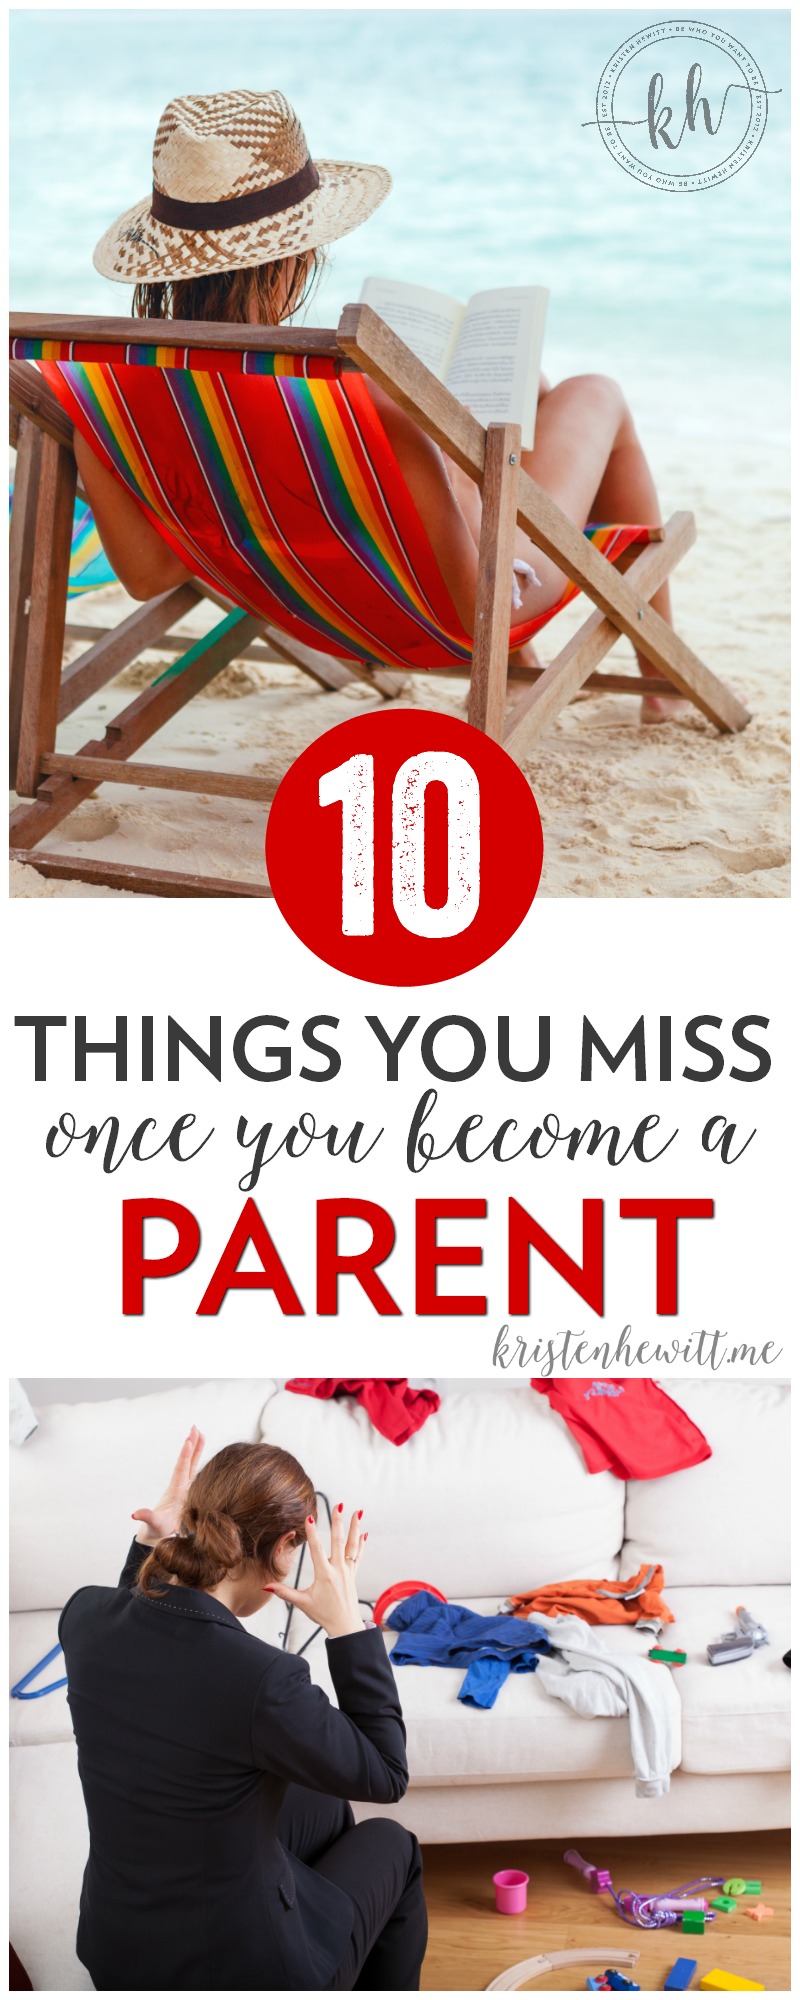 Being a parent is the greatest gift in the world. It's also exhausting. Here are the 10 things you'll miss the most once you become a parent!